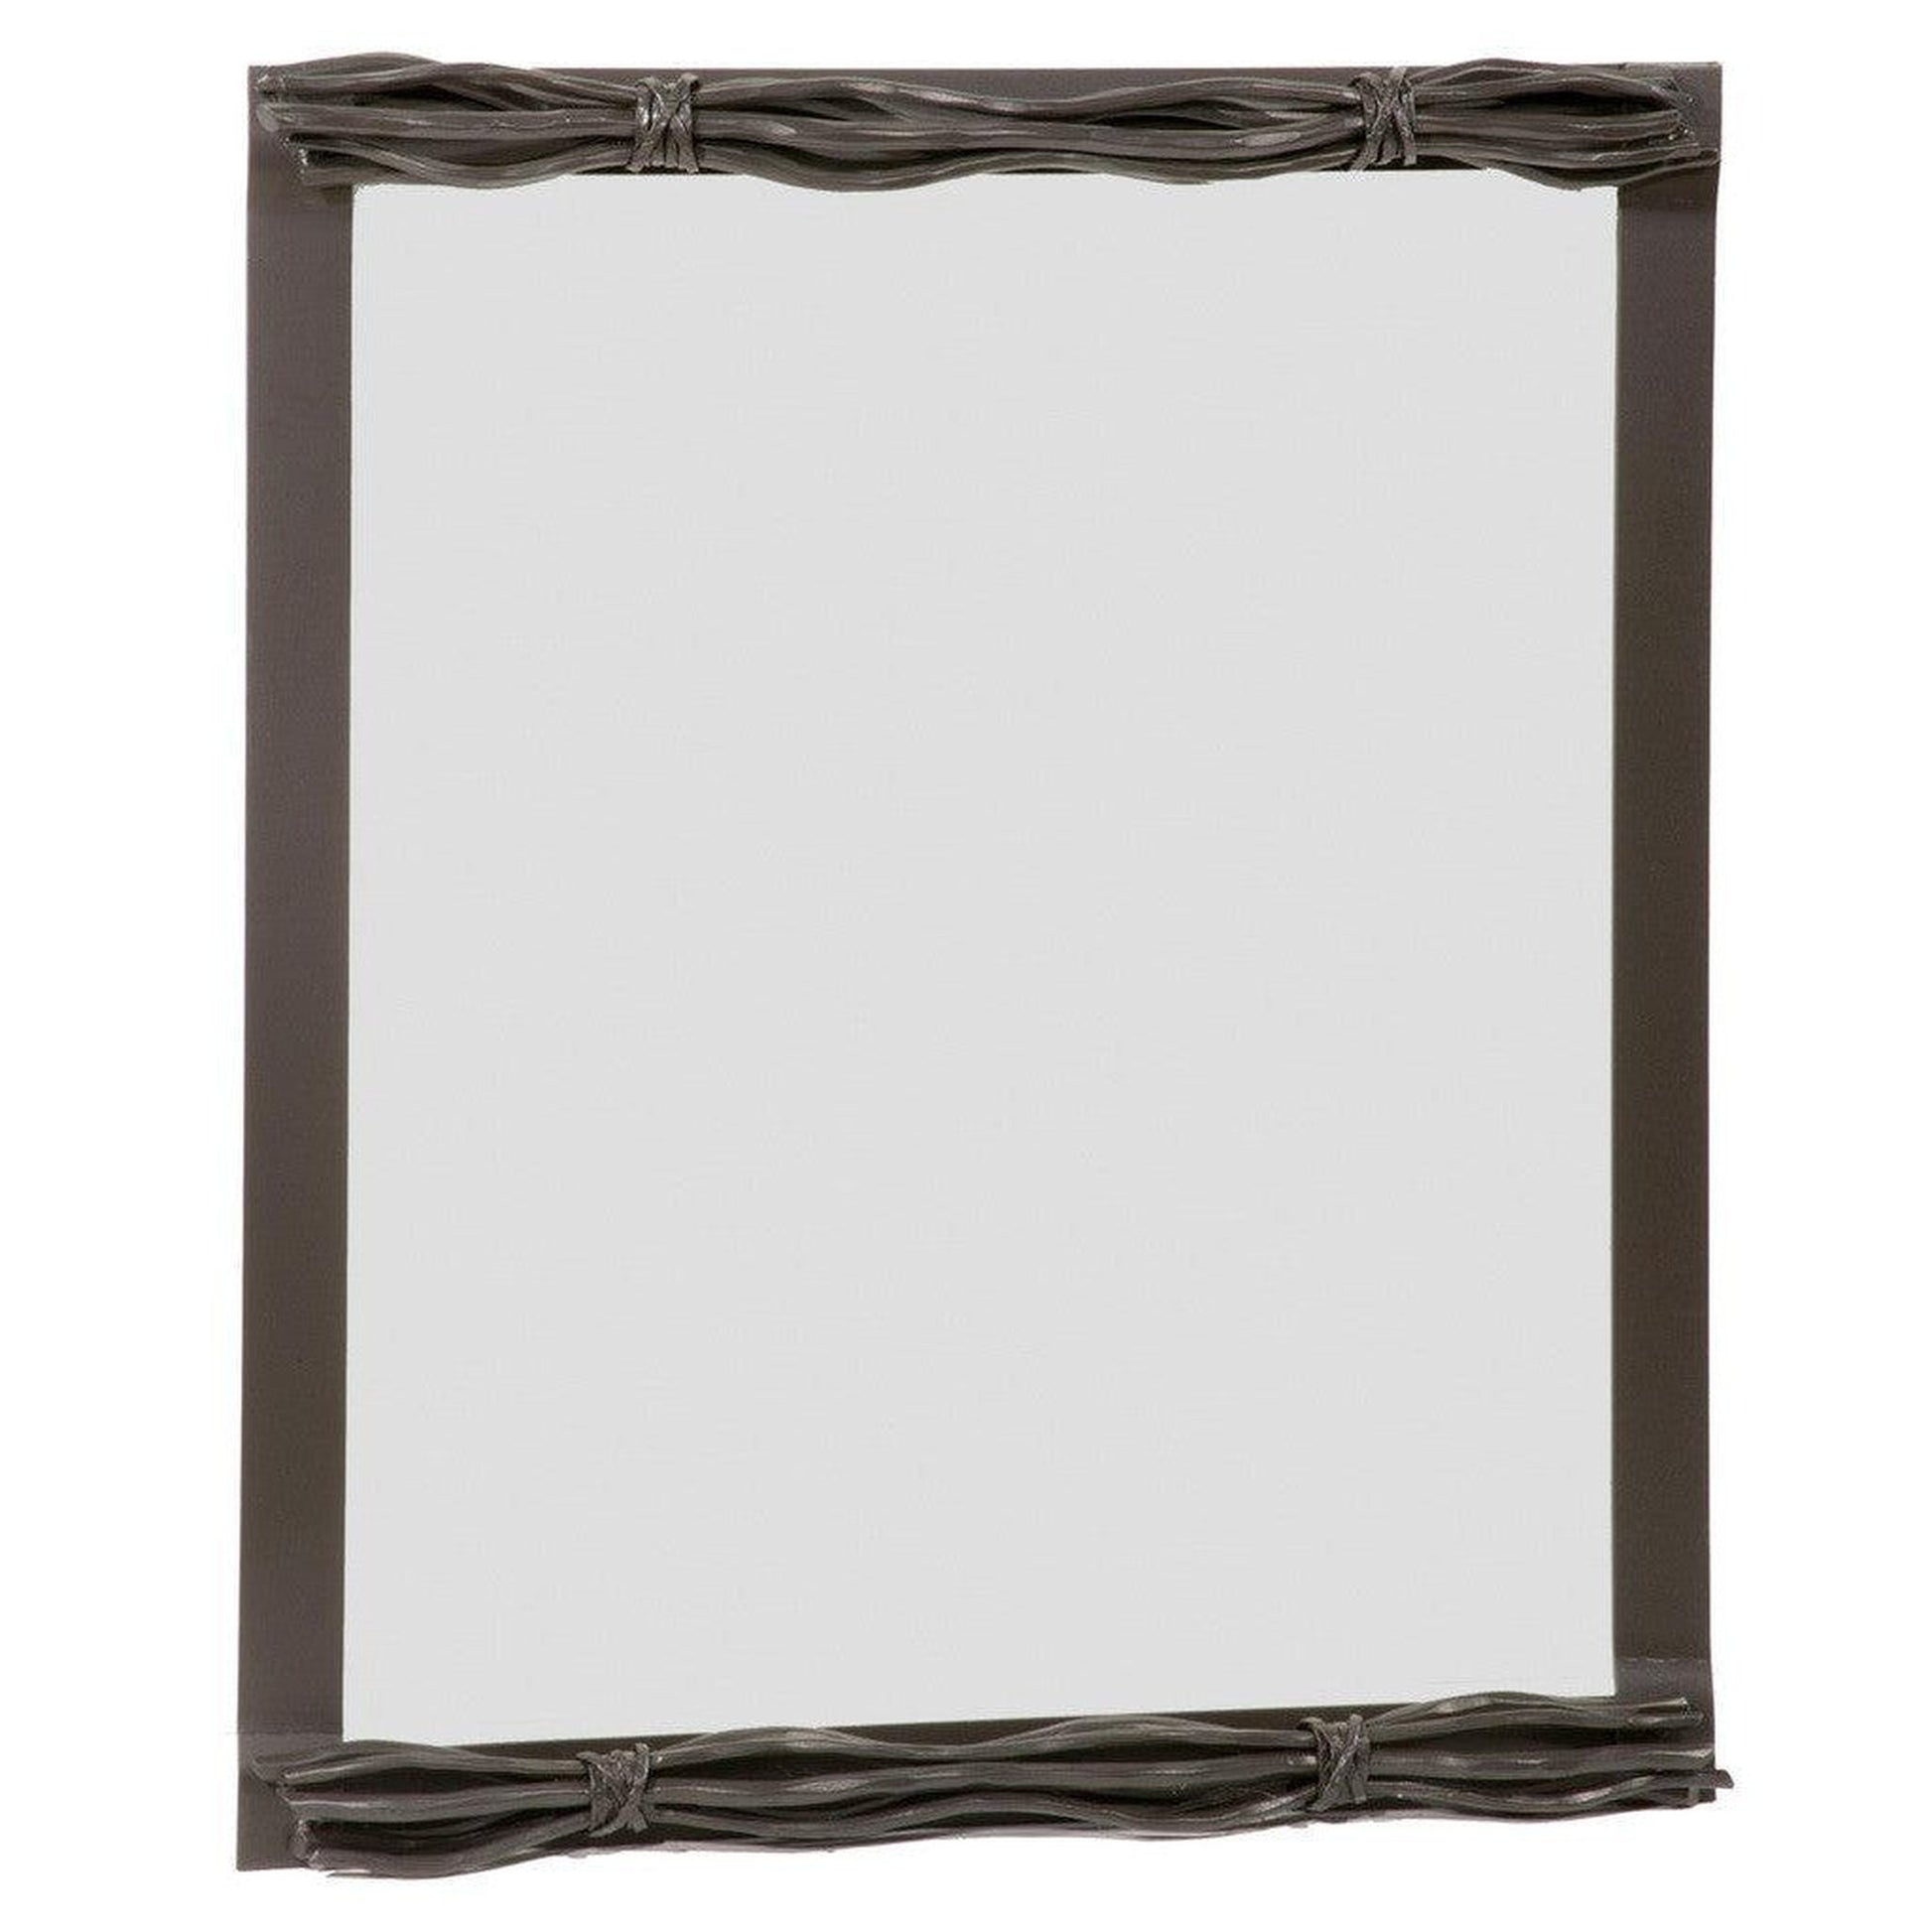 Stone County Ironworks Rush 21" x 26" Small Burnished Gold Iron Wall Mirror With Pewter Iron Accent